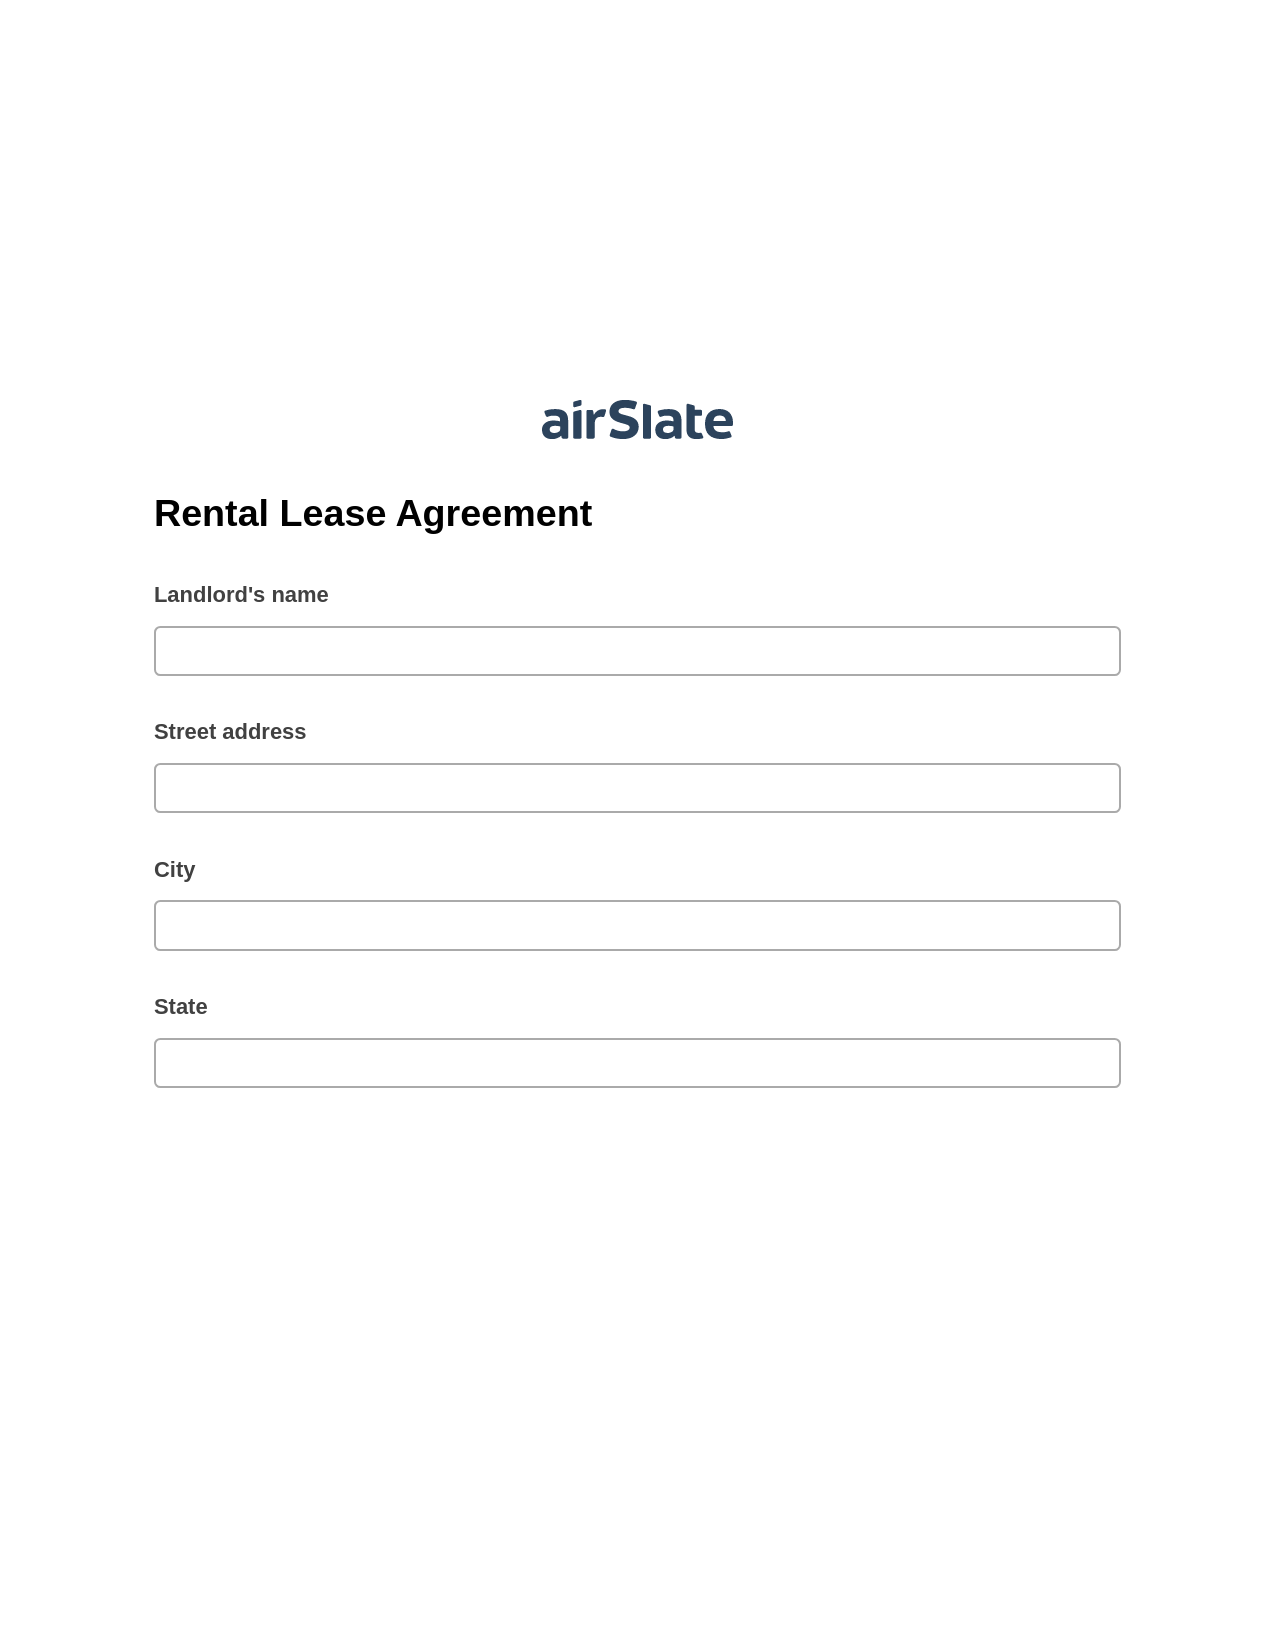 Rental Lease Agreement Pre-fill Document Bot, Create QuickBooks invoice Bot, Export to Formstack Documents Bot